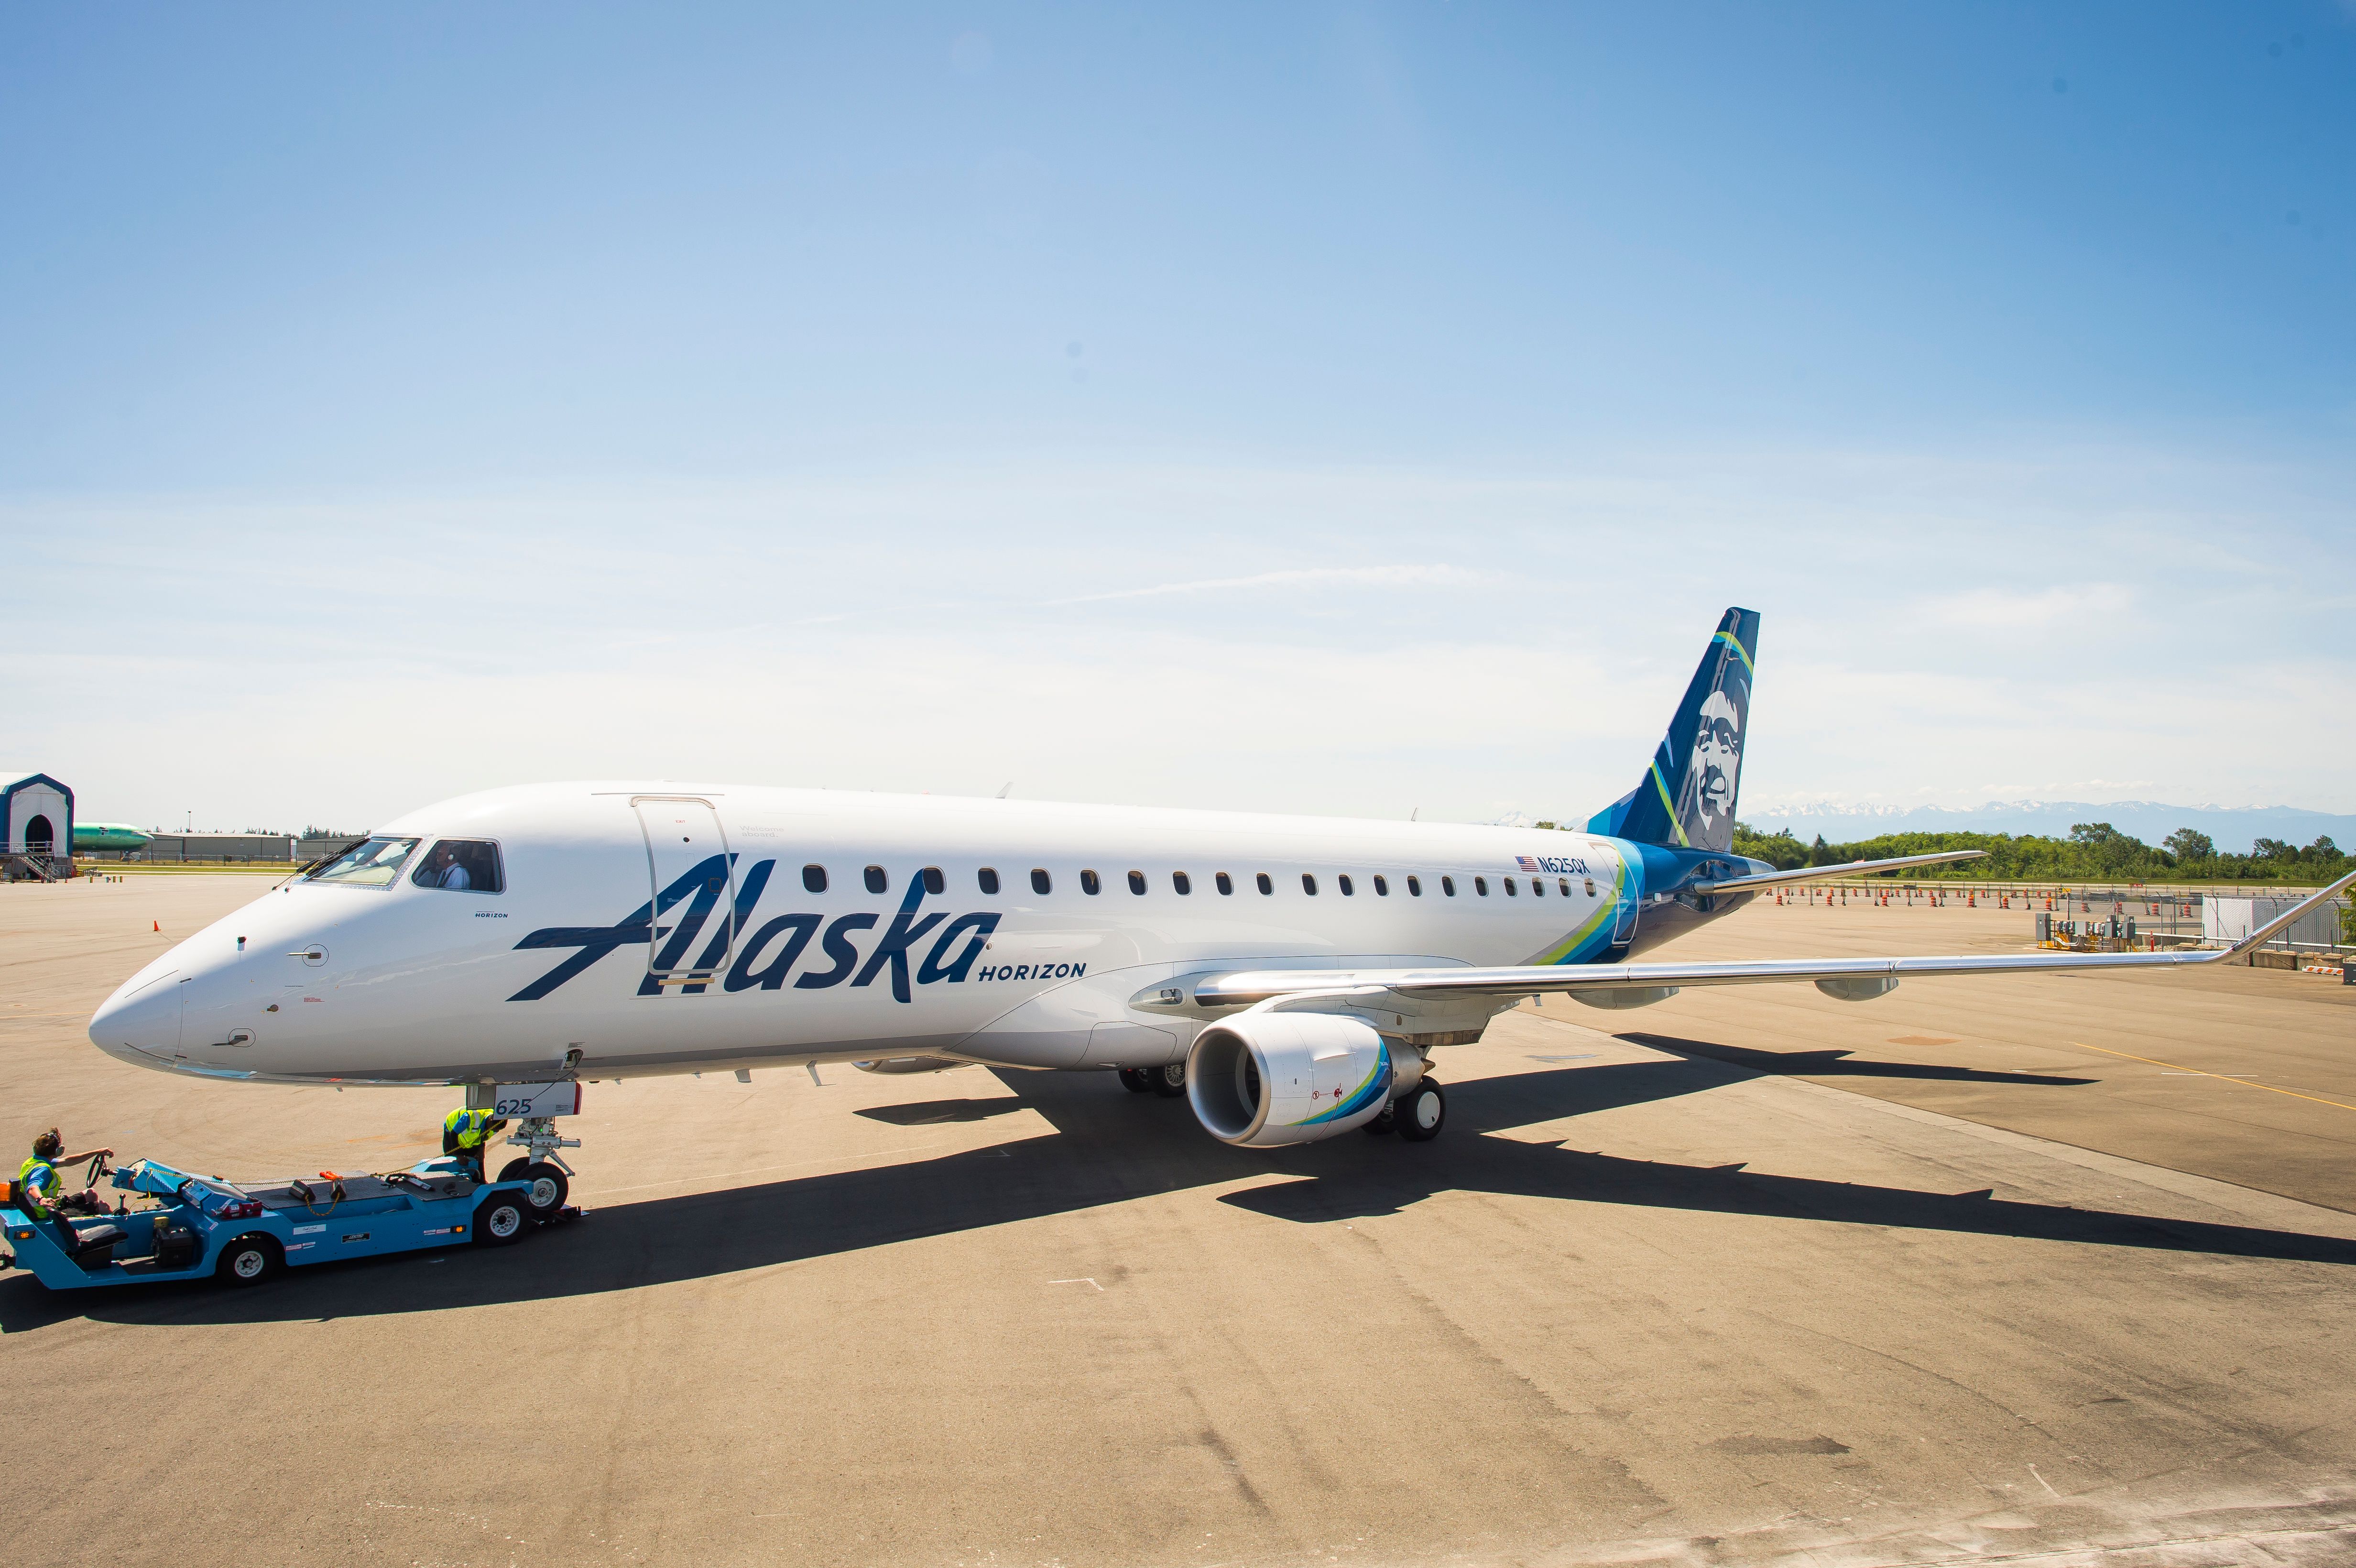 Brazilian Bank Helps Finance Alaska Airlines Purchase Of 11 Embraer E175s